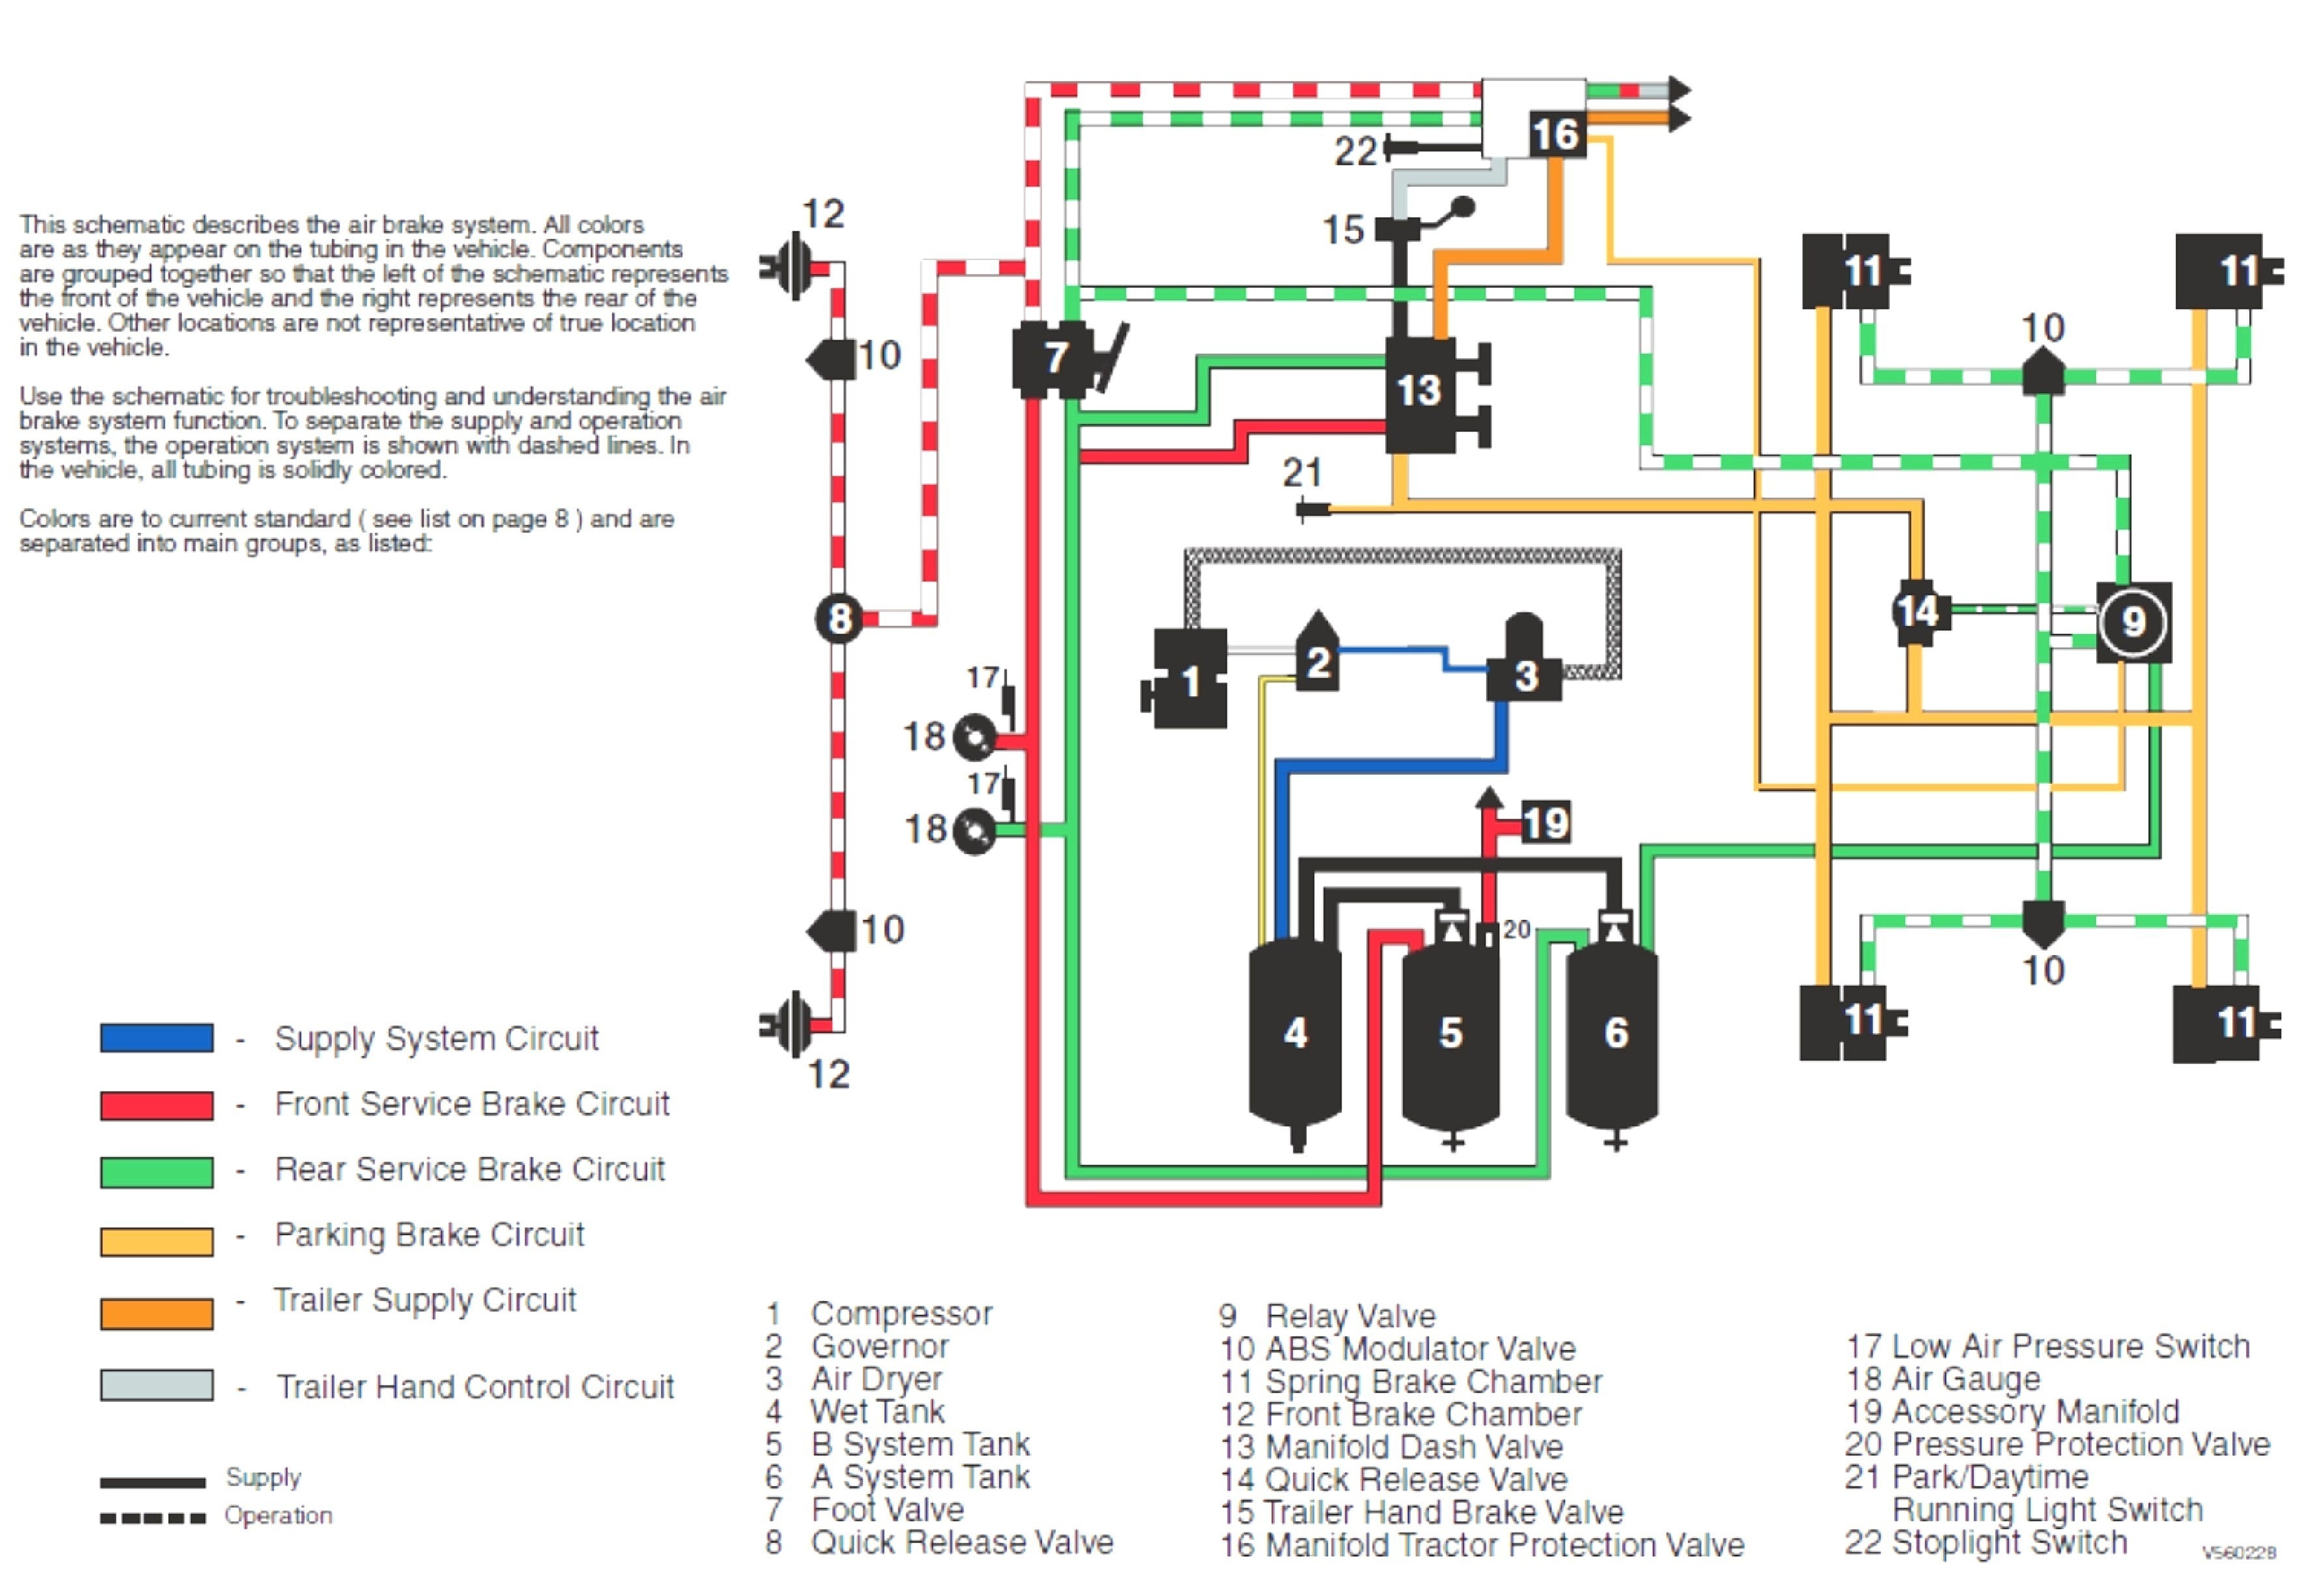 Wiring Diagrams for Utility Trailer Refrence Utility Trailer Wiring Harbor Freight Boat Trailer Harbor Freight